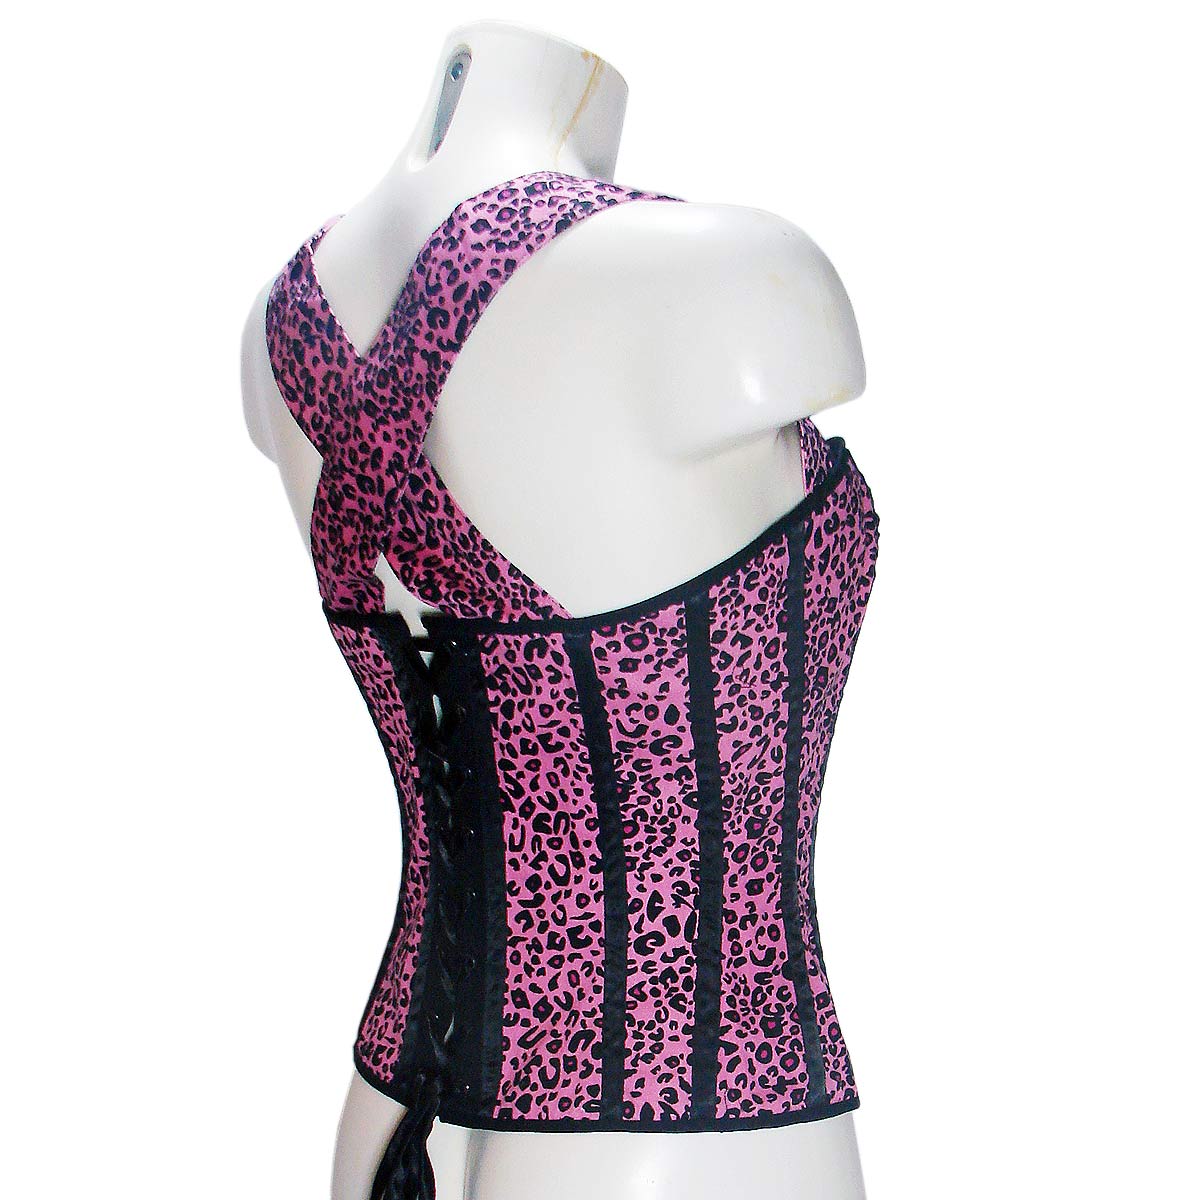 Corset bodice top Oi Oi Pink Leopard Print by Hell Bunny Another Way of Life